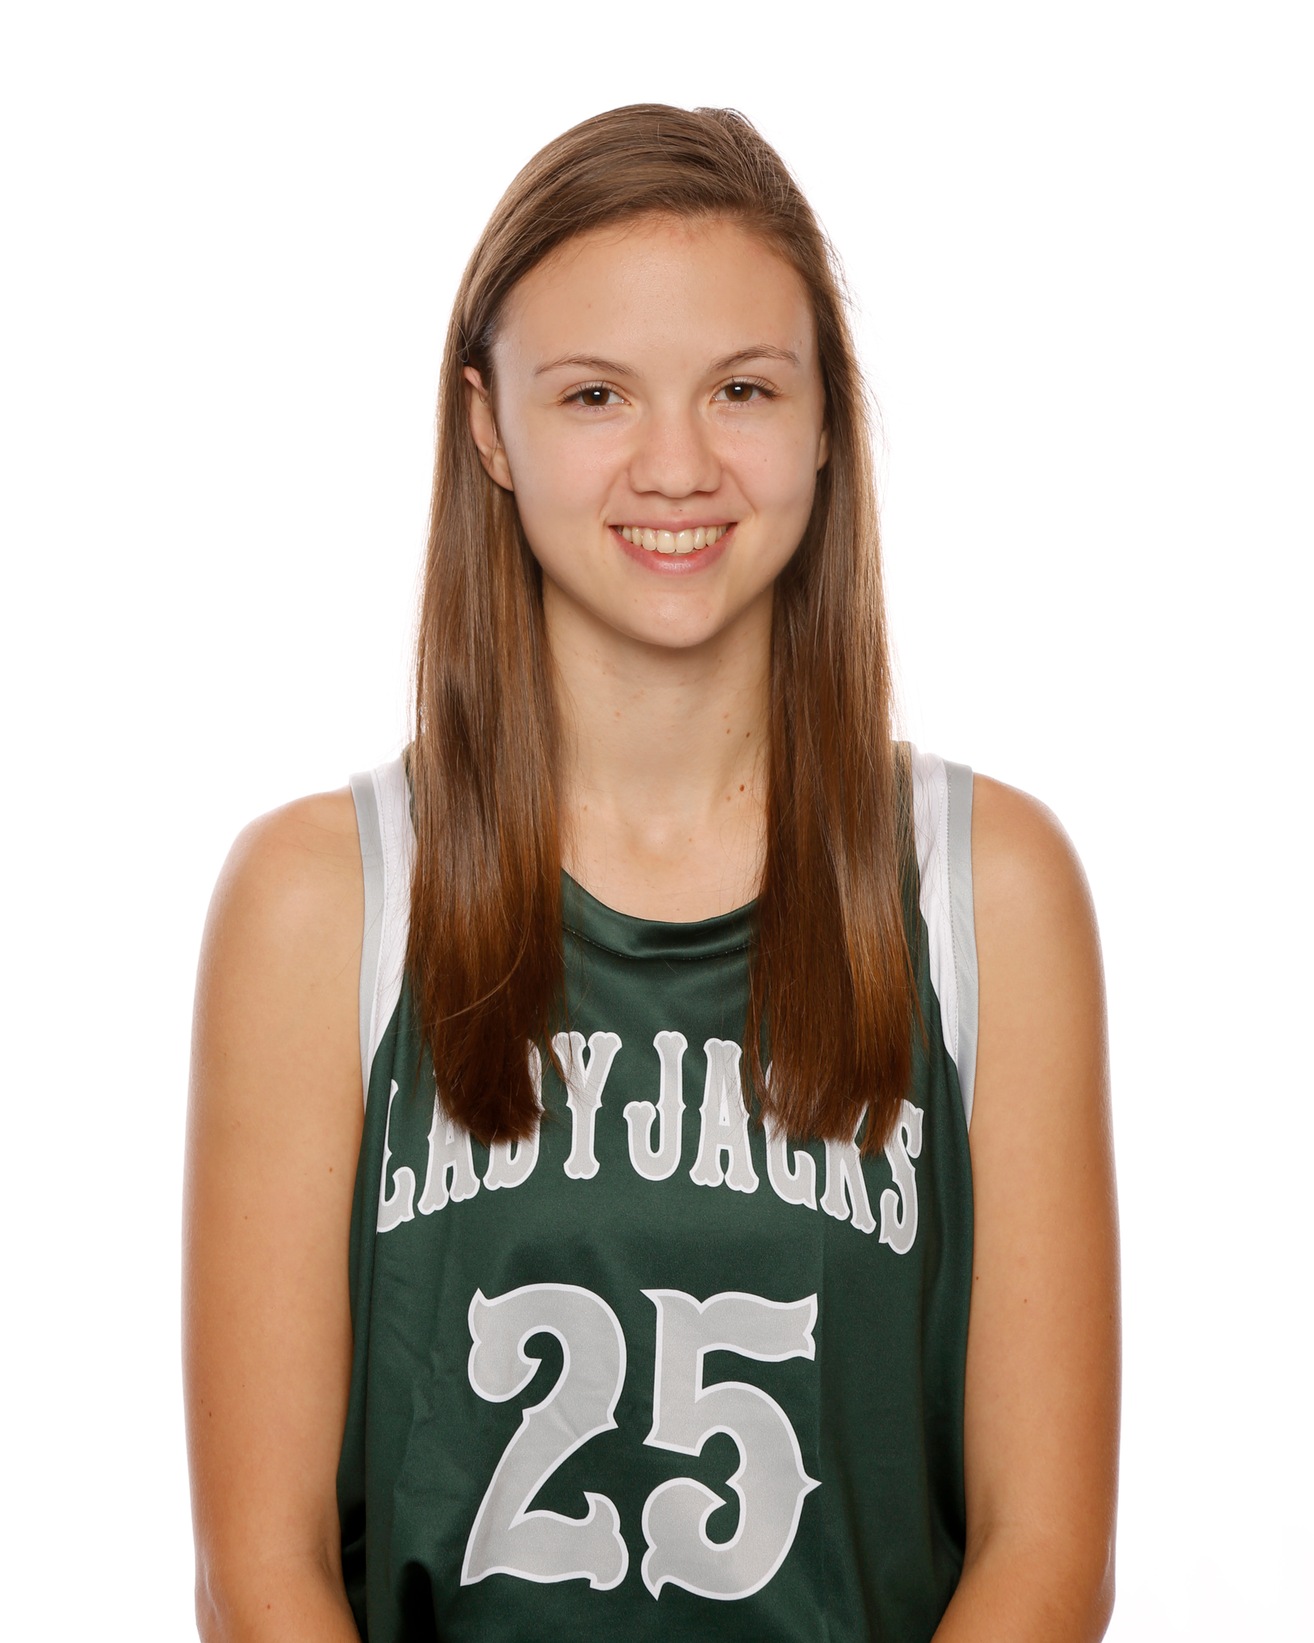 Freshman Kinze Martinson of Rolette, ND scored a season high 12 points for the Ladyjacks vs Trinity Bible College.